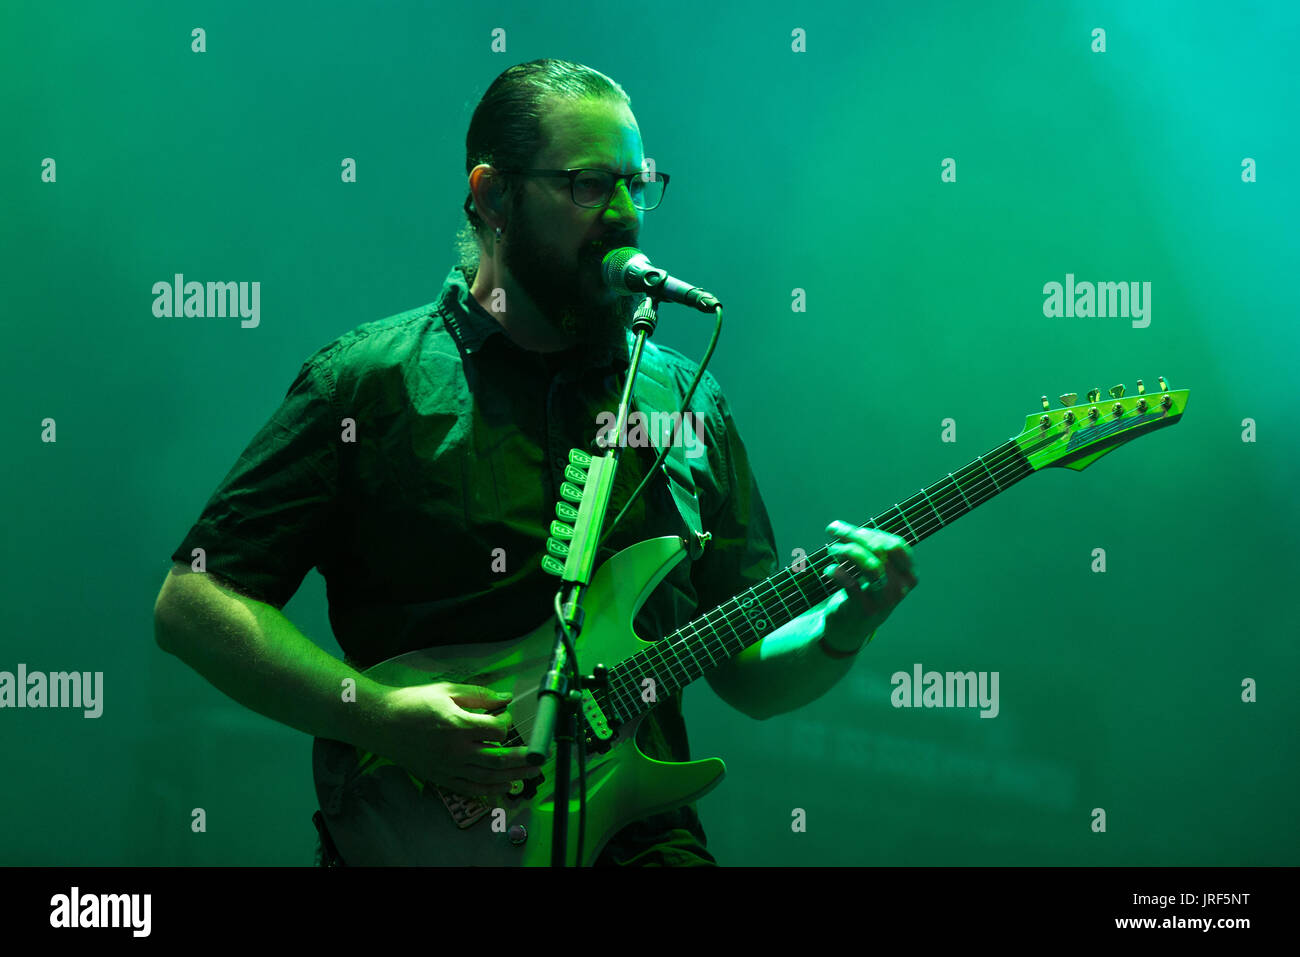 Wacken, Germany. 04th Aug, 2017. Ihsahn, guitar player and singer of the  Norwegian black metal band Emperor, performing on the Faster Stage of the  Wacken Open Air Festivals in Wacken, Germany, 04